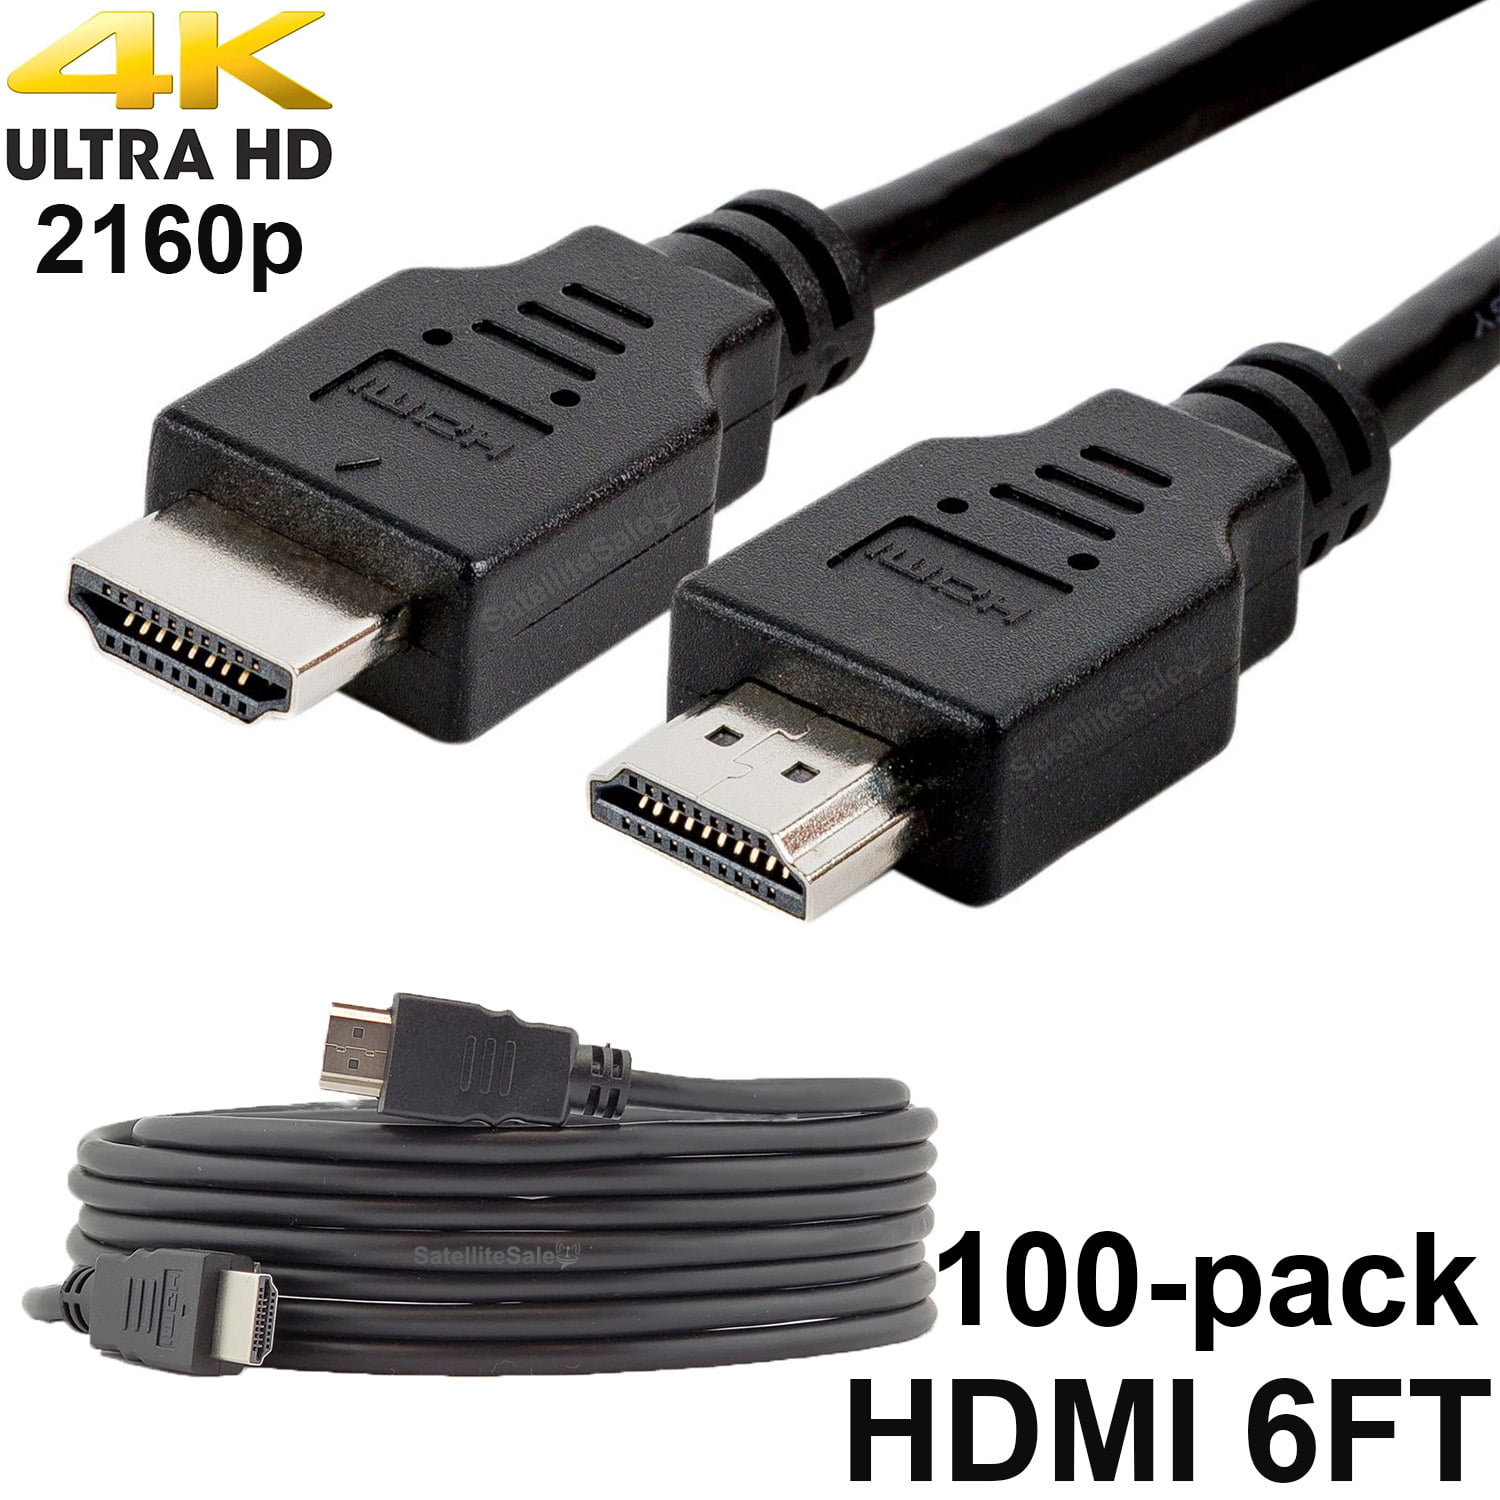 HDMI Cable 2.1 Ultra HD 8K 120Hz 4K 3D HDR Hi Speed Compatible 2.0a 2.0b 1.4 Lot 